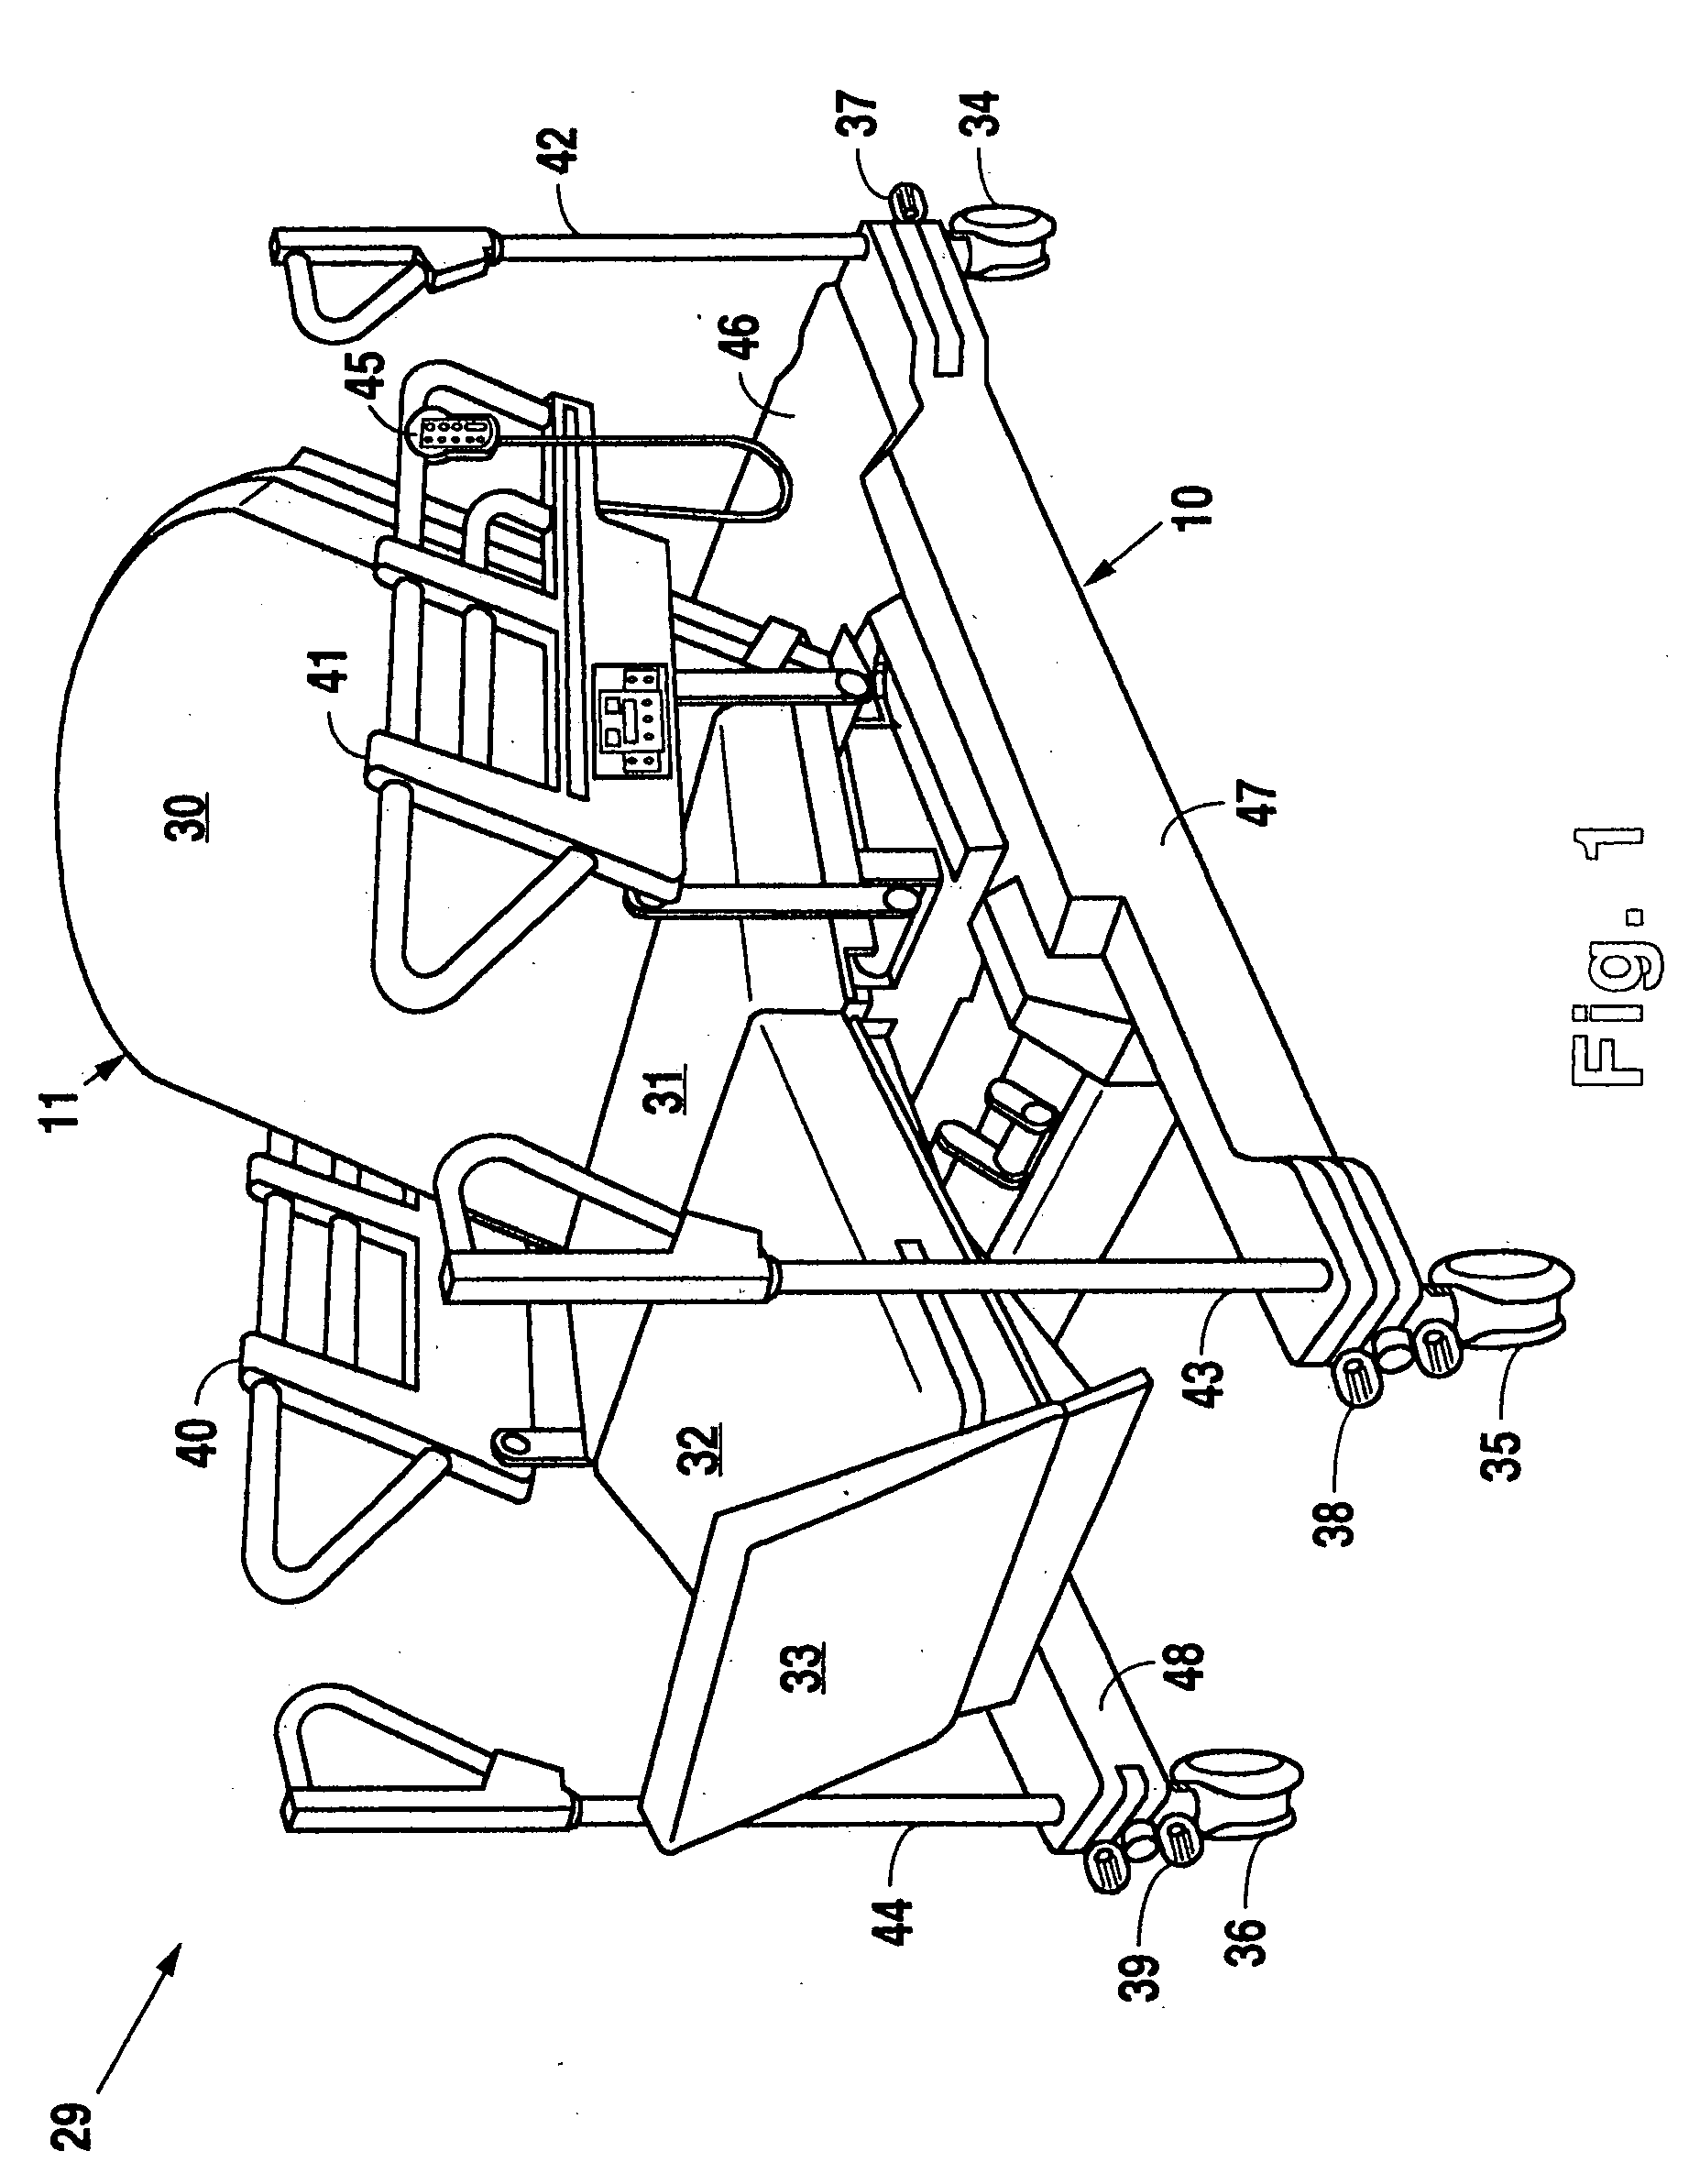 Bariatric bed apparatus and methods